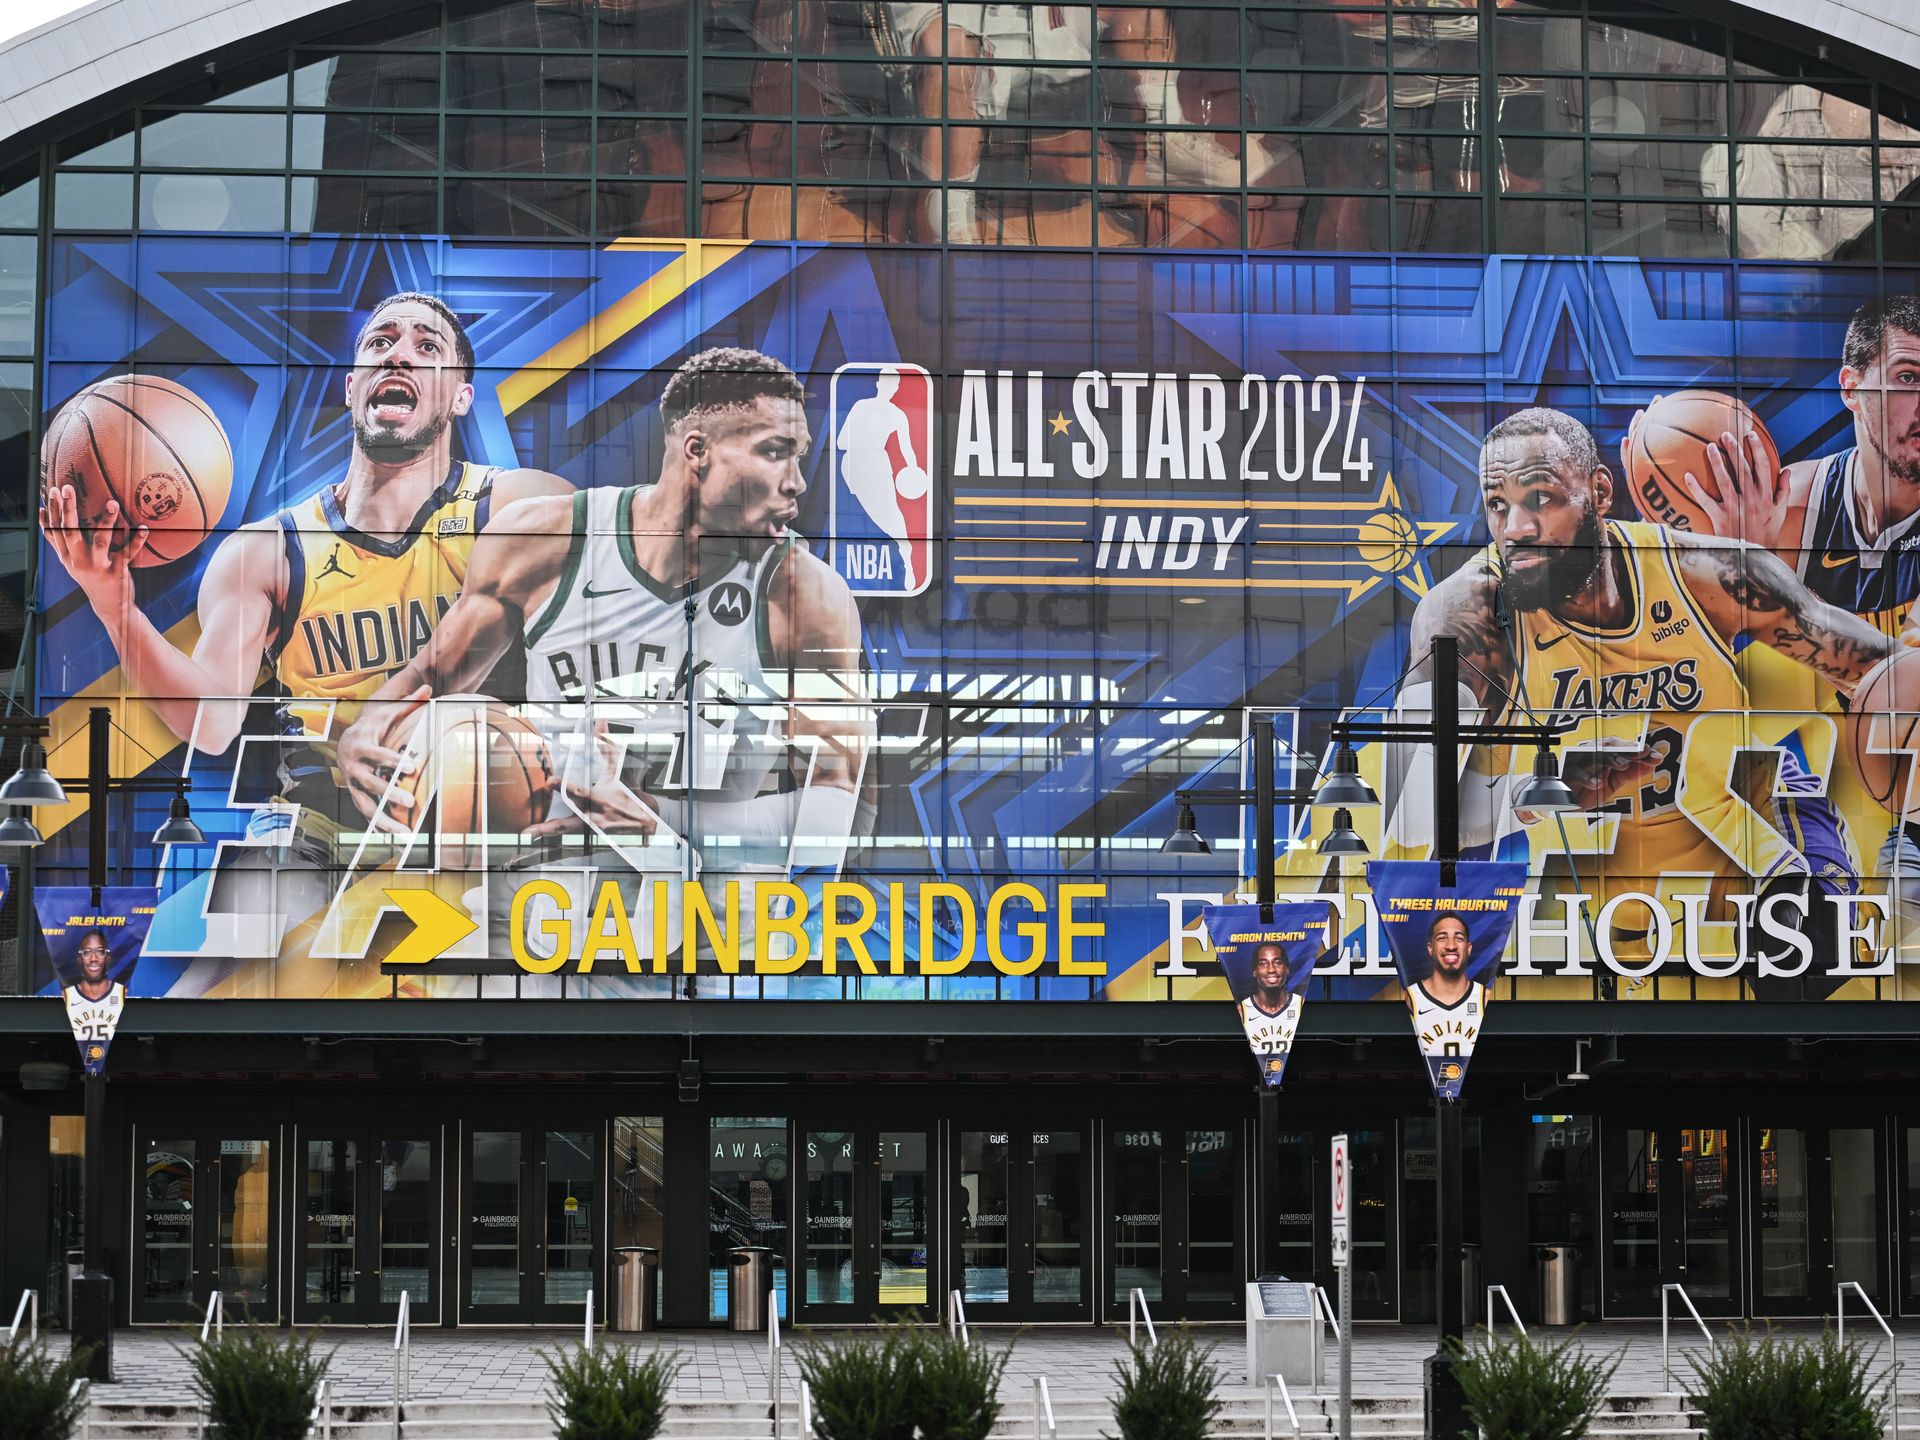 Indianapolis Airport celebrates NBA All-Star weekend with decorations,  basketball court